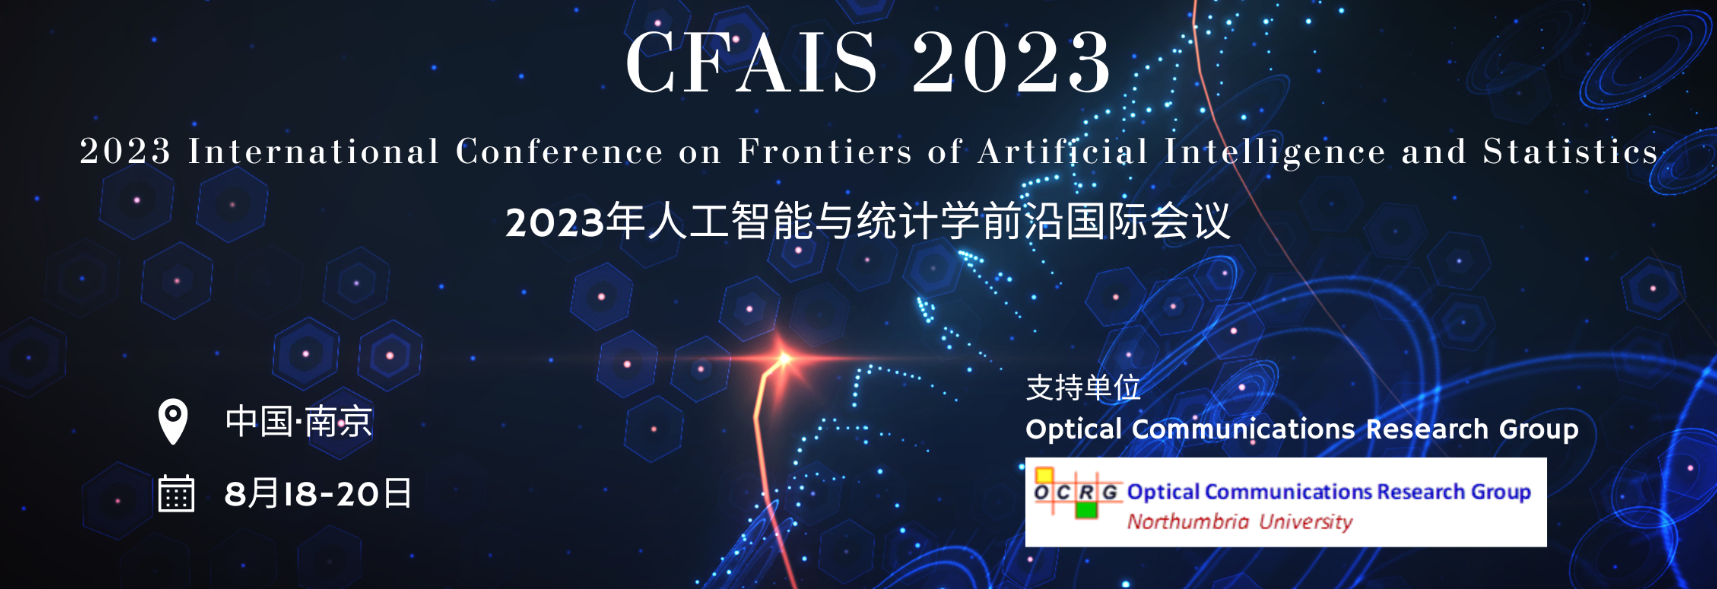 2023 4th International Conference on Frontiers of Artificial Intelligence and Statistics (CFAIS 2023)